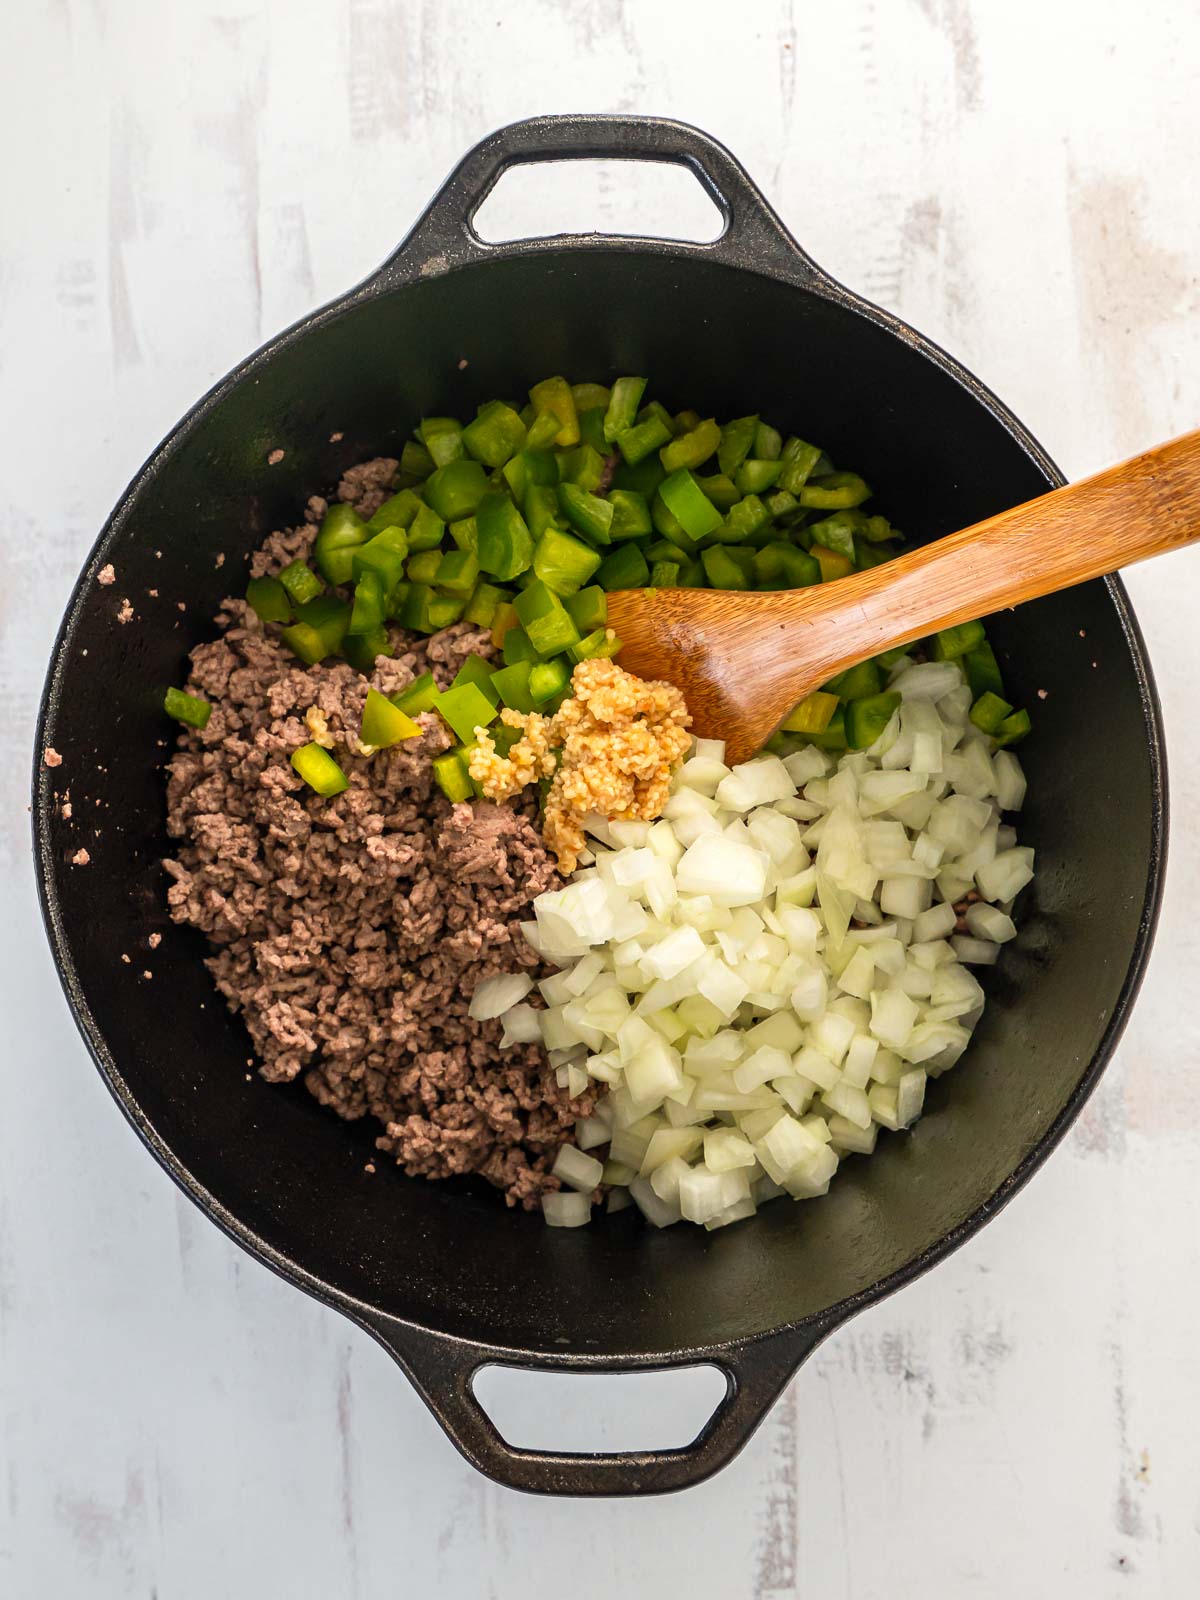 Wooden spatula stirring ground beef, onions, green pepper, and garlic in a cast iron pot.